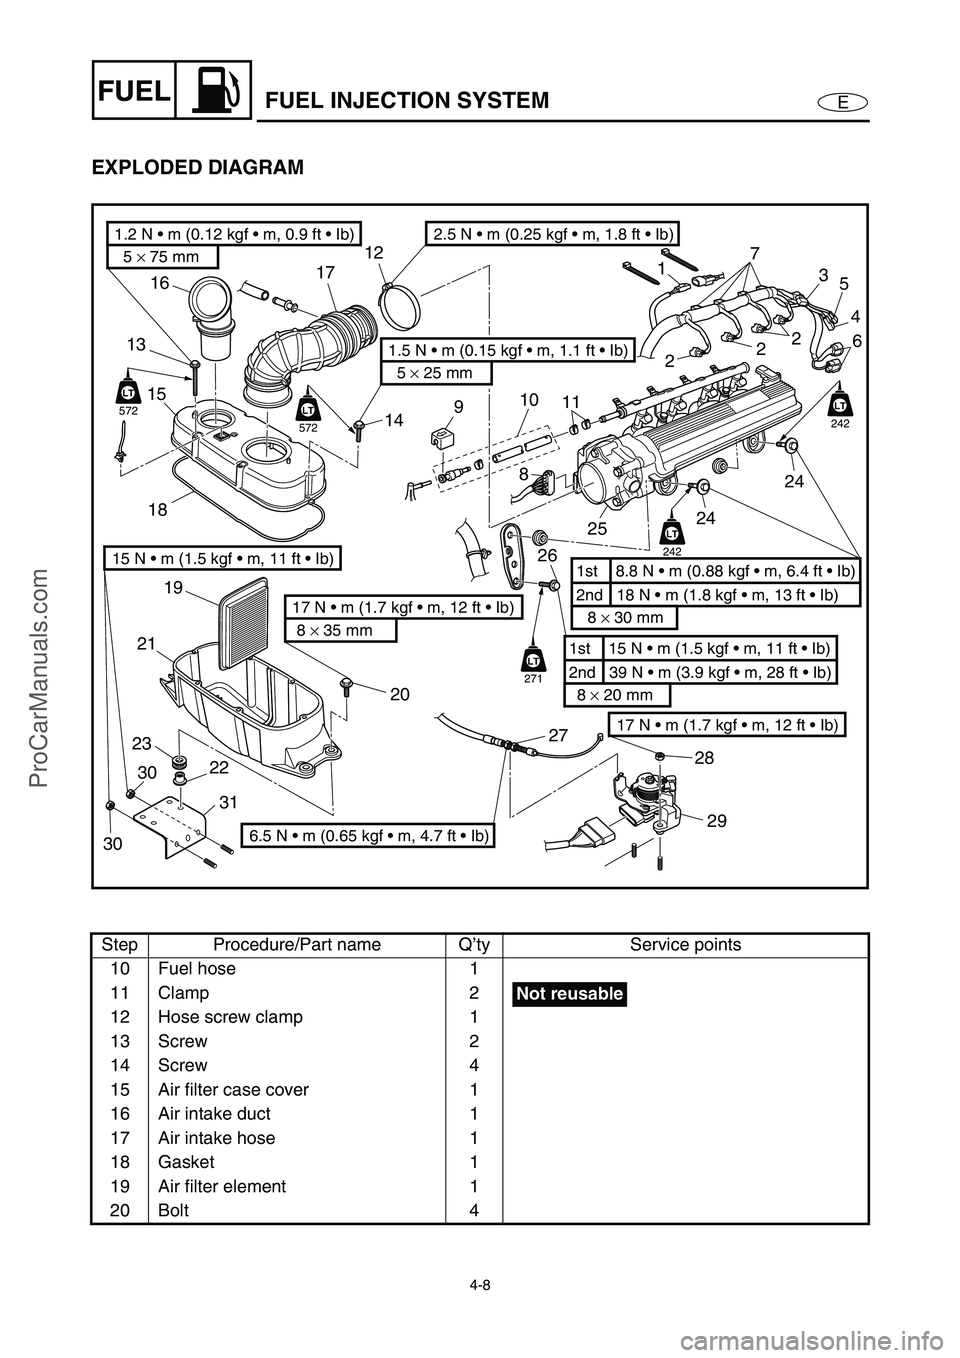 YAMAHA VX110 2005  Service Manual 4-8
EFUELFUEL INJECTION SYSTEM
EXPLODED DIAGRAM
Step Procedure/Part name Q’ty Service points
10 Fuel hose 1
11 Clamp 2
12 Hose screw clamp 1
13 Screw 2
14 Screw 4
15 Air filter case cover 1
16 Air i